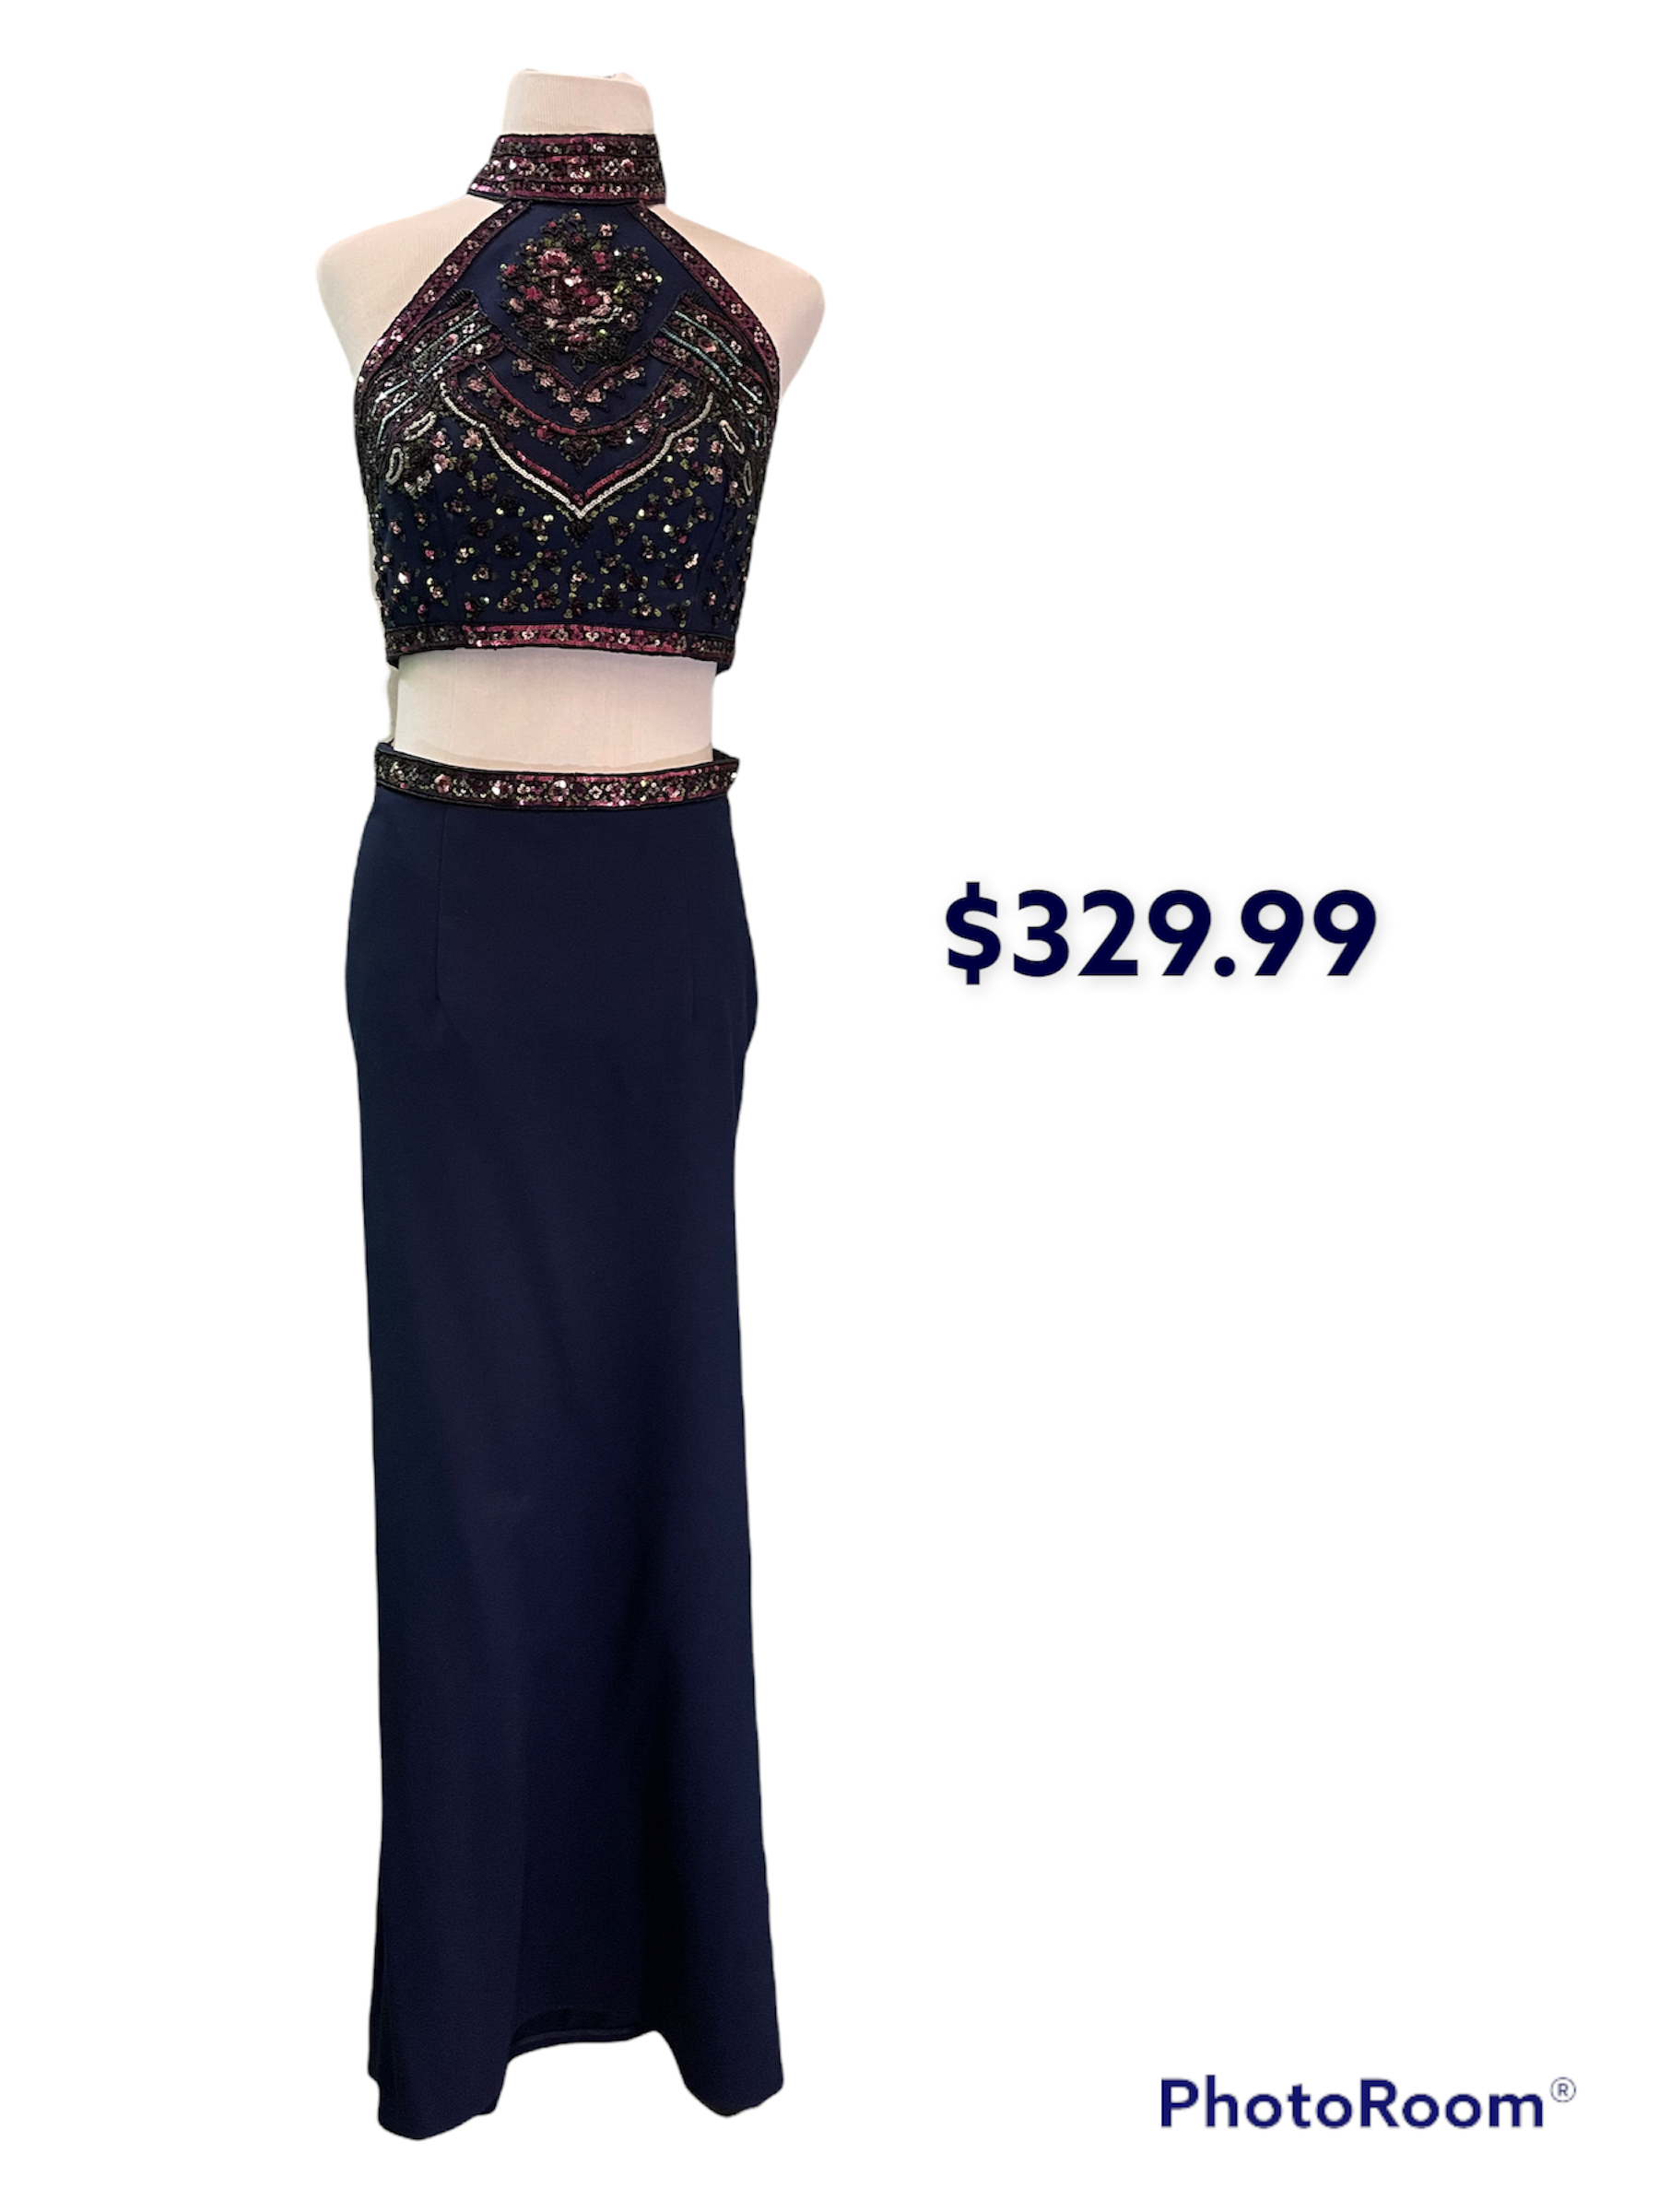 Sherri Hill 2 Piece Formal
Beautifully beaded with a low cut back waistline and flaired skirt that is longer in the back
Navy and purple
Size: 6
NO RETURNS ON PROM DRESSES